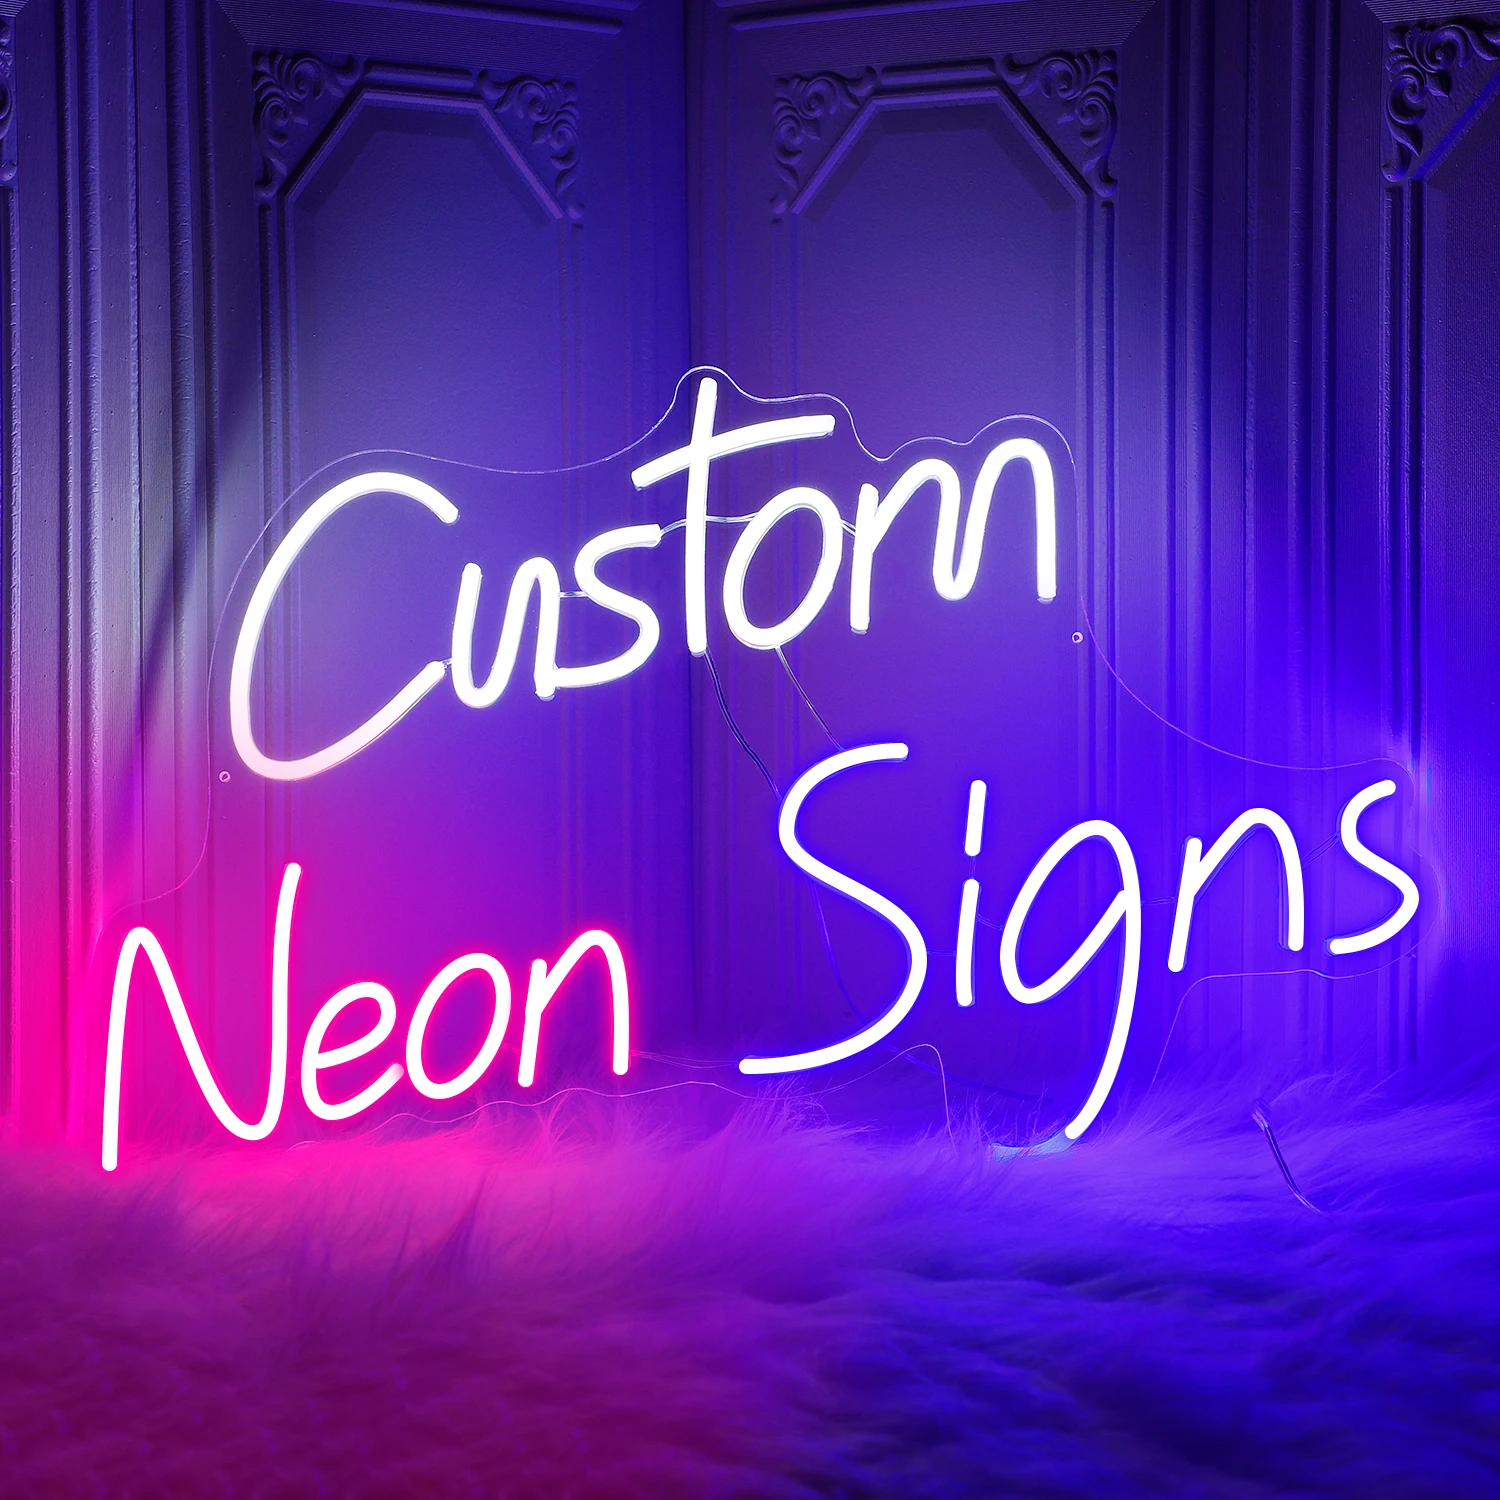 Custom Neon Signs Handmade Personalized LED for Wall Decor Festival Gift Party Wedding Bar Decor Company Logo or Business